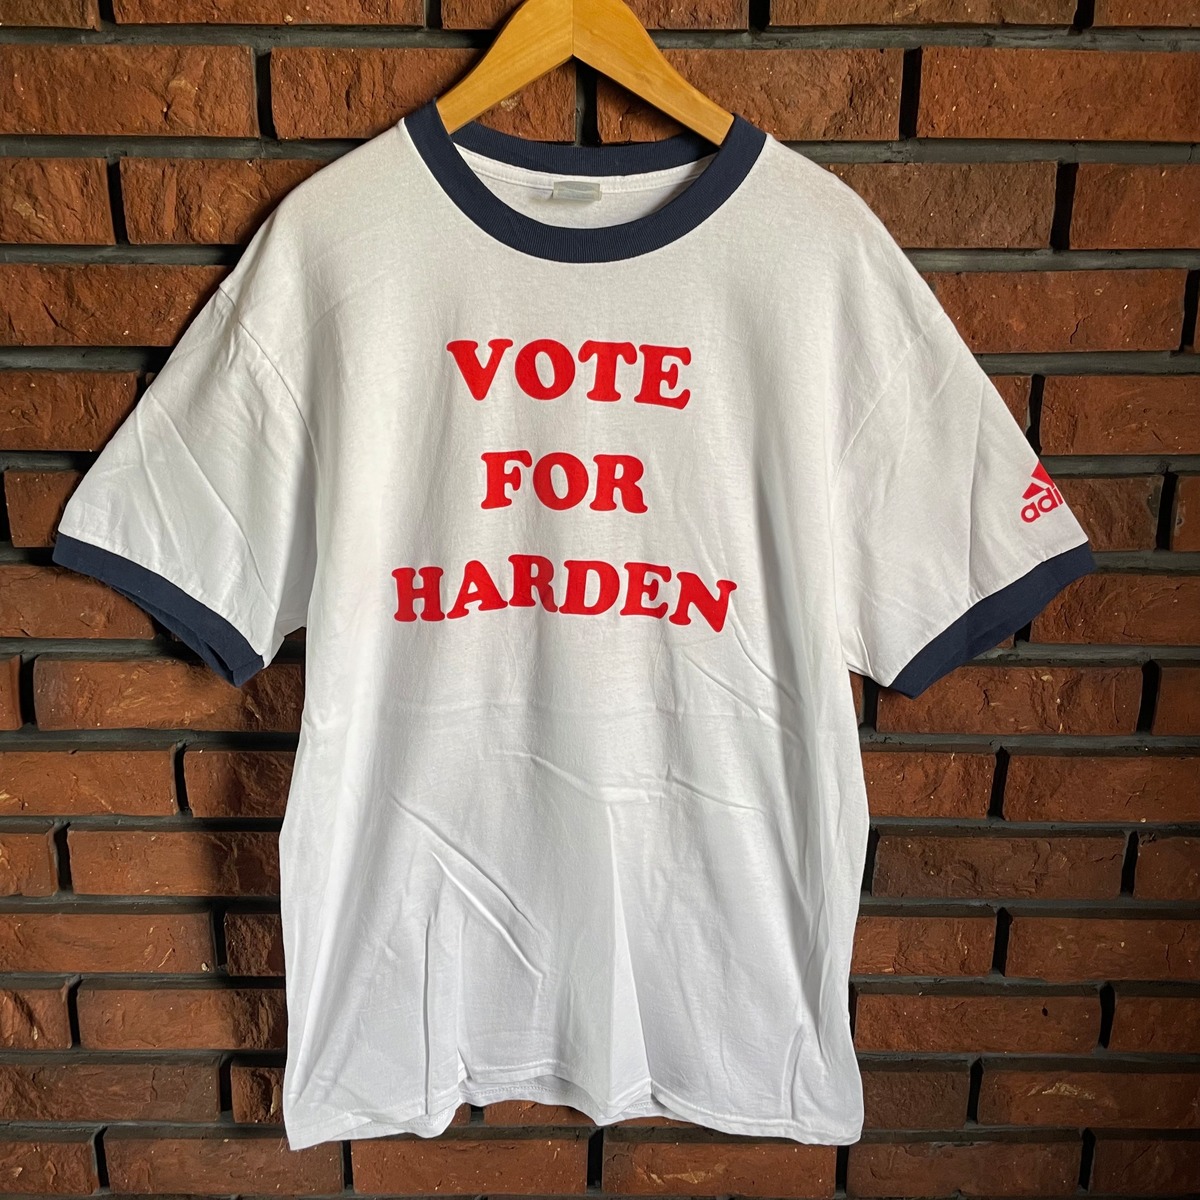 adidas VOTE FOR HARDEN プリントリンガーTシャツ | 古着屋PENNY